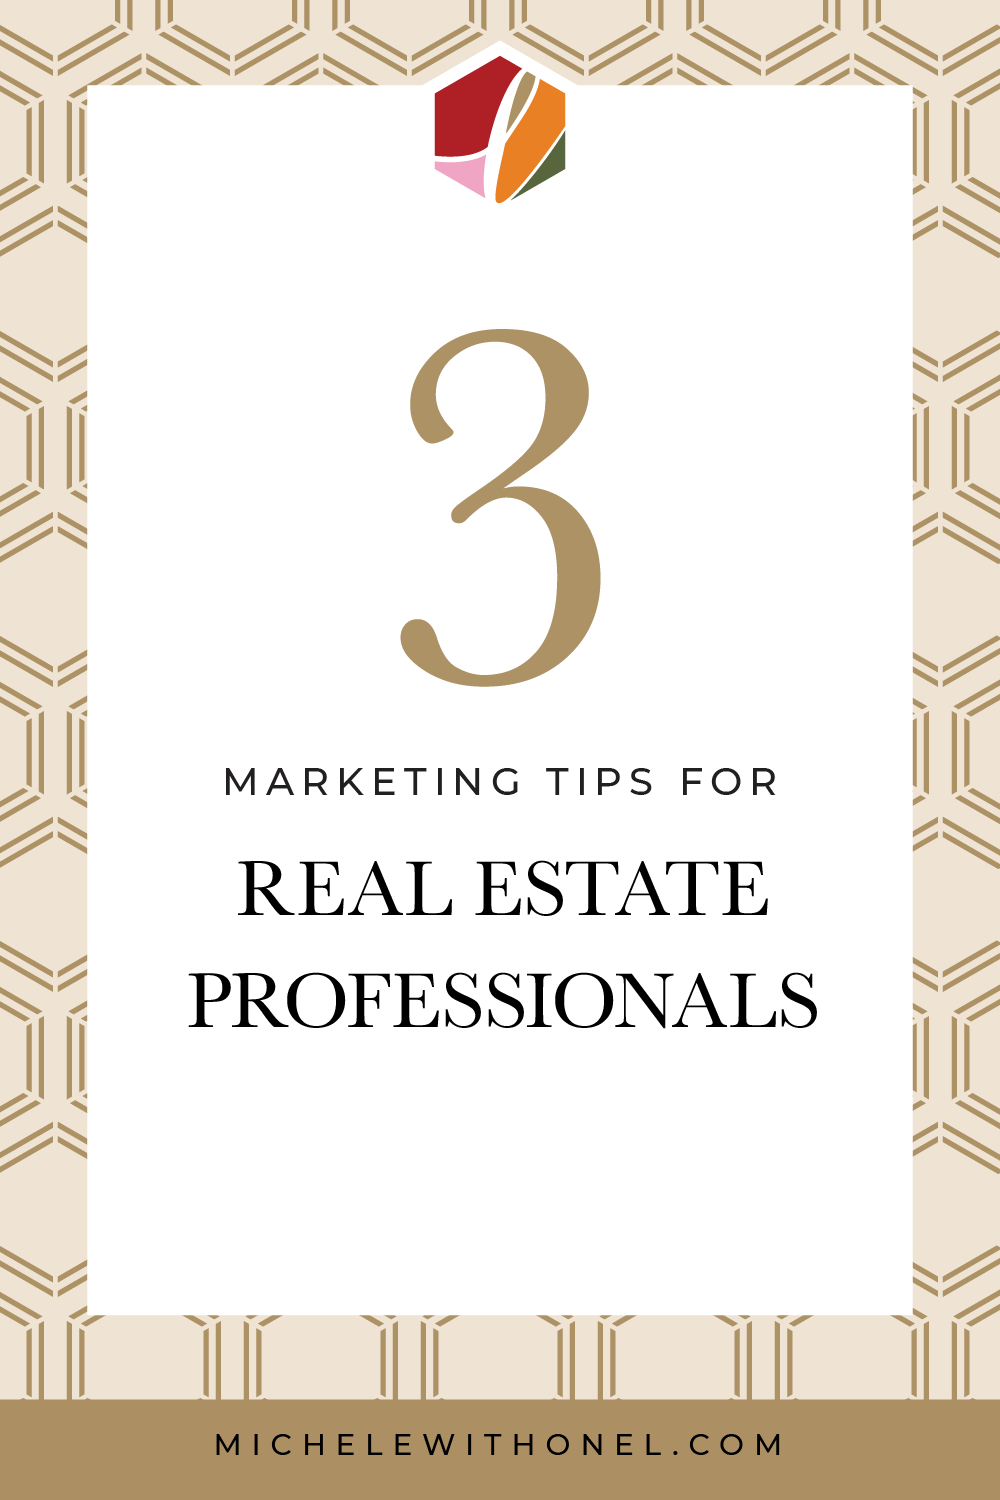 Real estate agents: Want to know how to market yourself in this quickly changing market? My quick tips for real estate marketing will give you three tips for standing out in a crowd — including how to create consistency and trust, level up your visual branding, and schedule a personal brand photography session (or two) that works for you! #personalbranding #realtor #realestatemarketing #branding